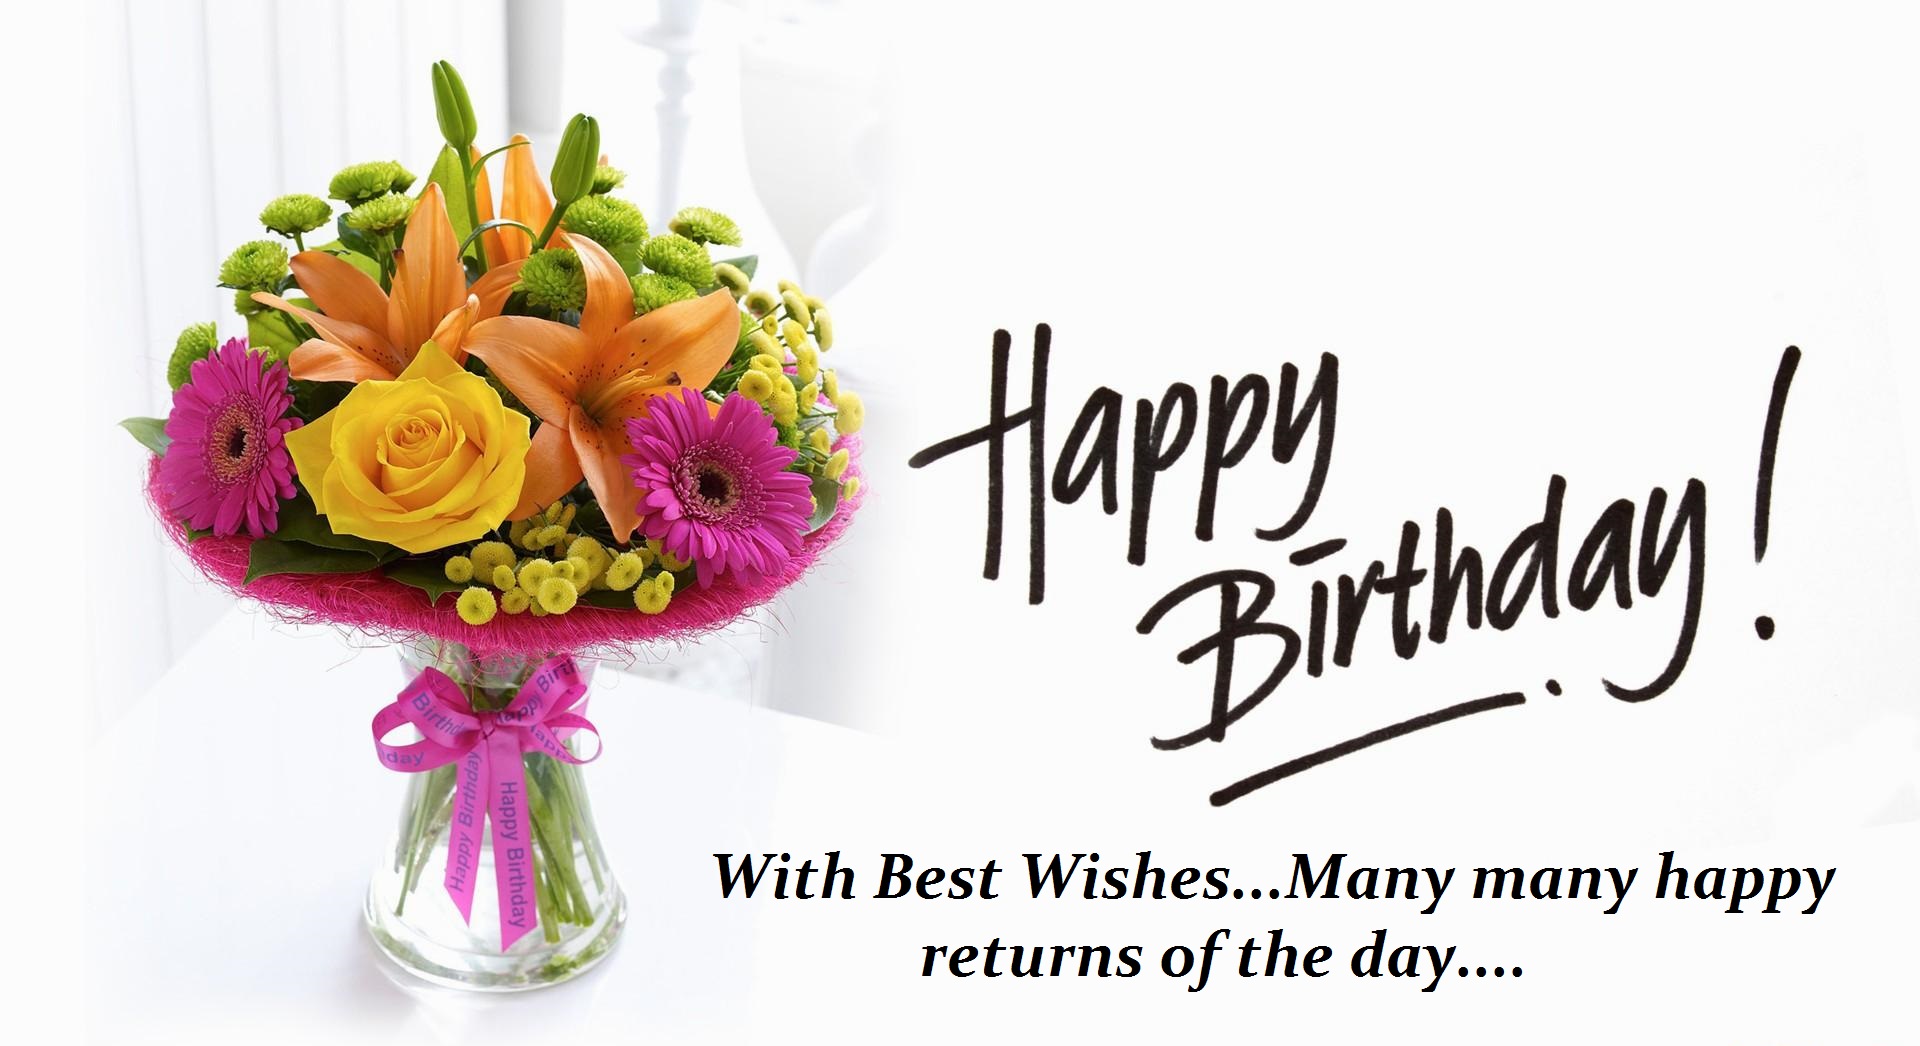 flower image with birthday wishes